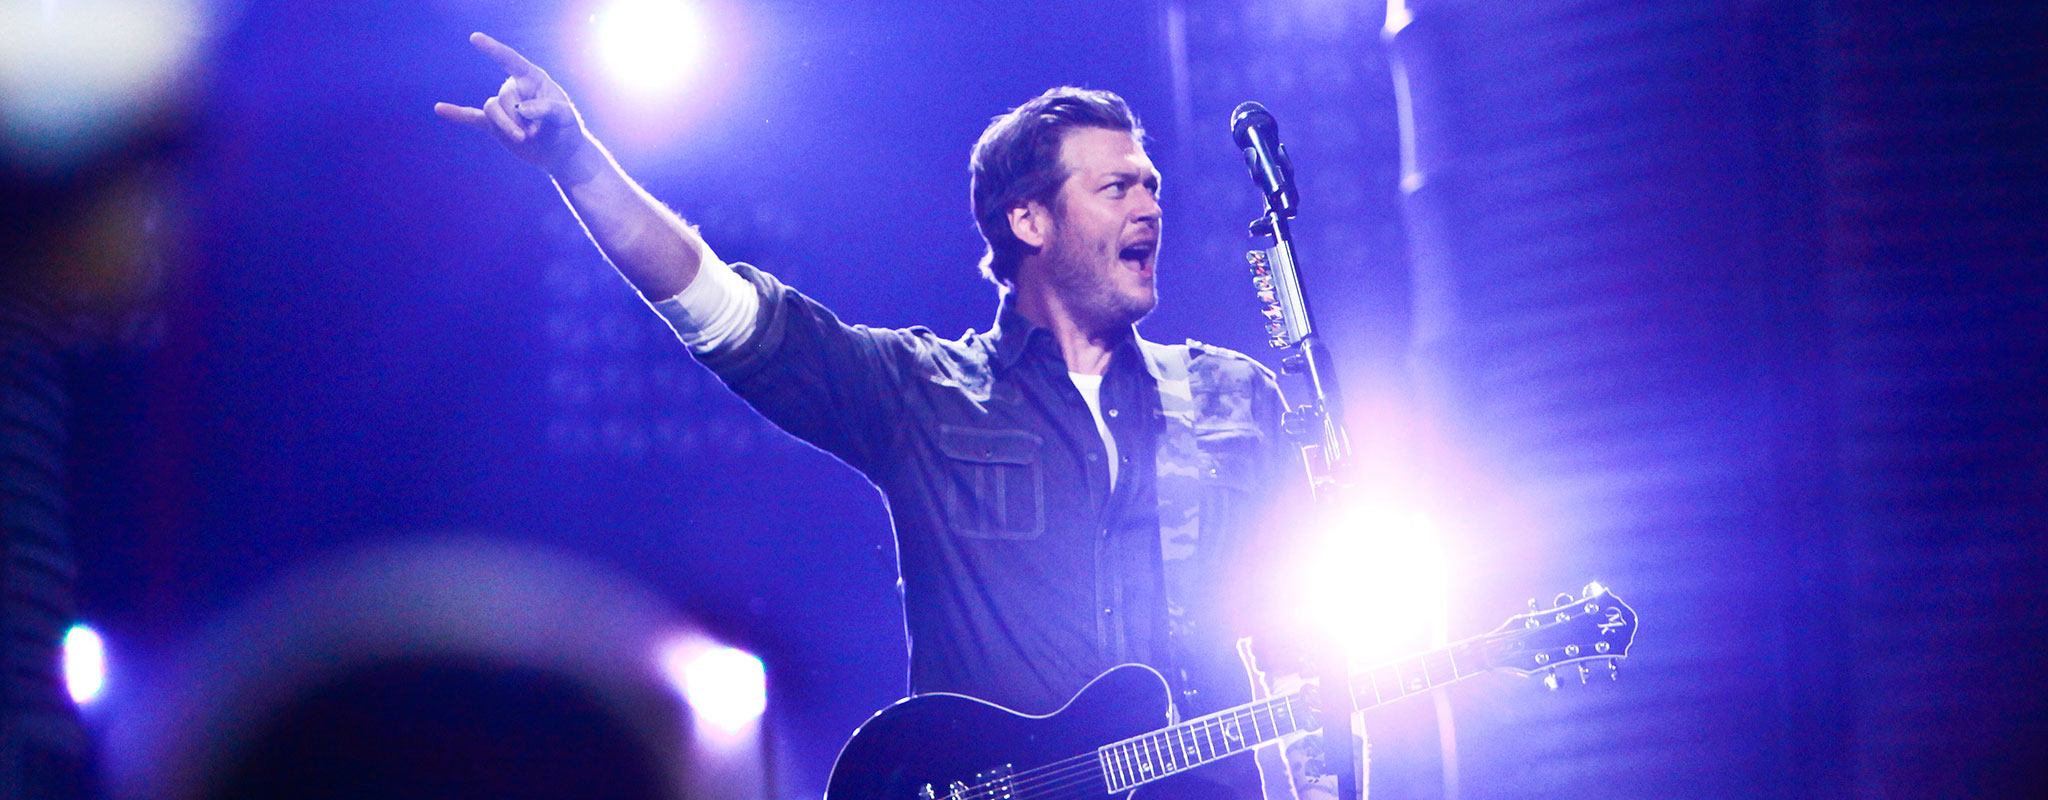 Will We See Blake Shelton at Boots & Hearts 2013?